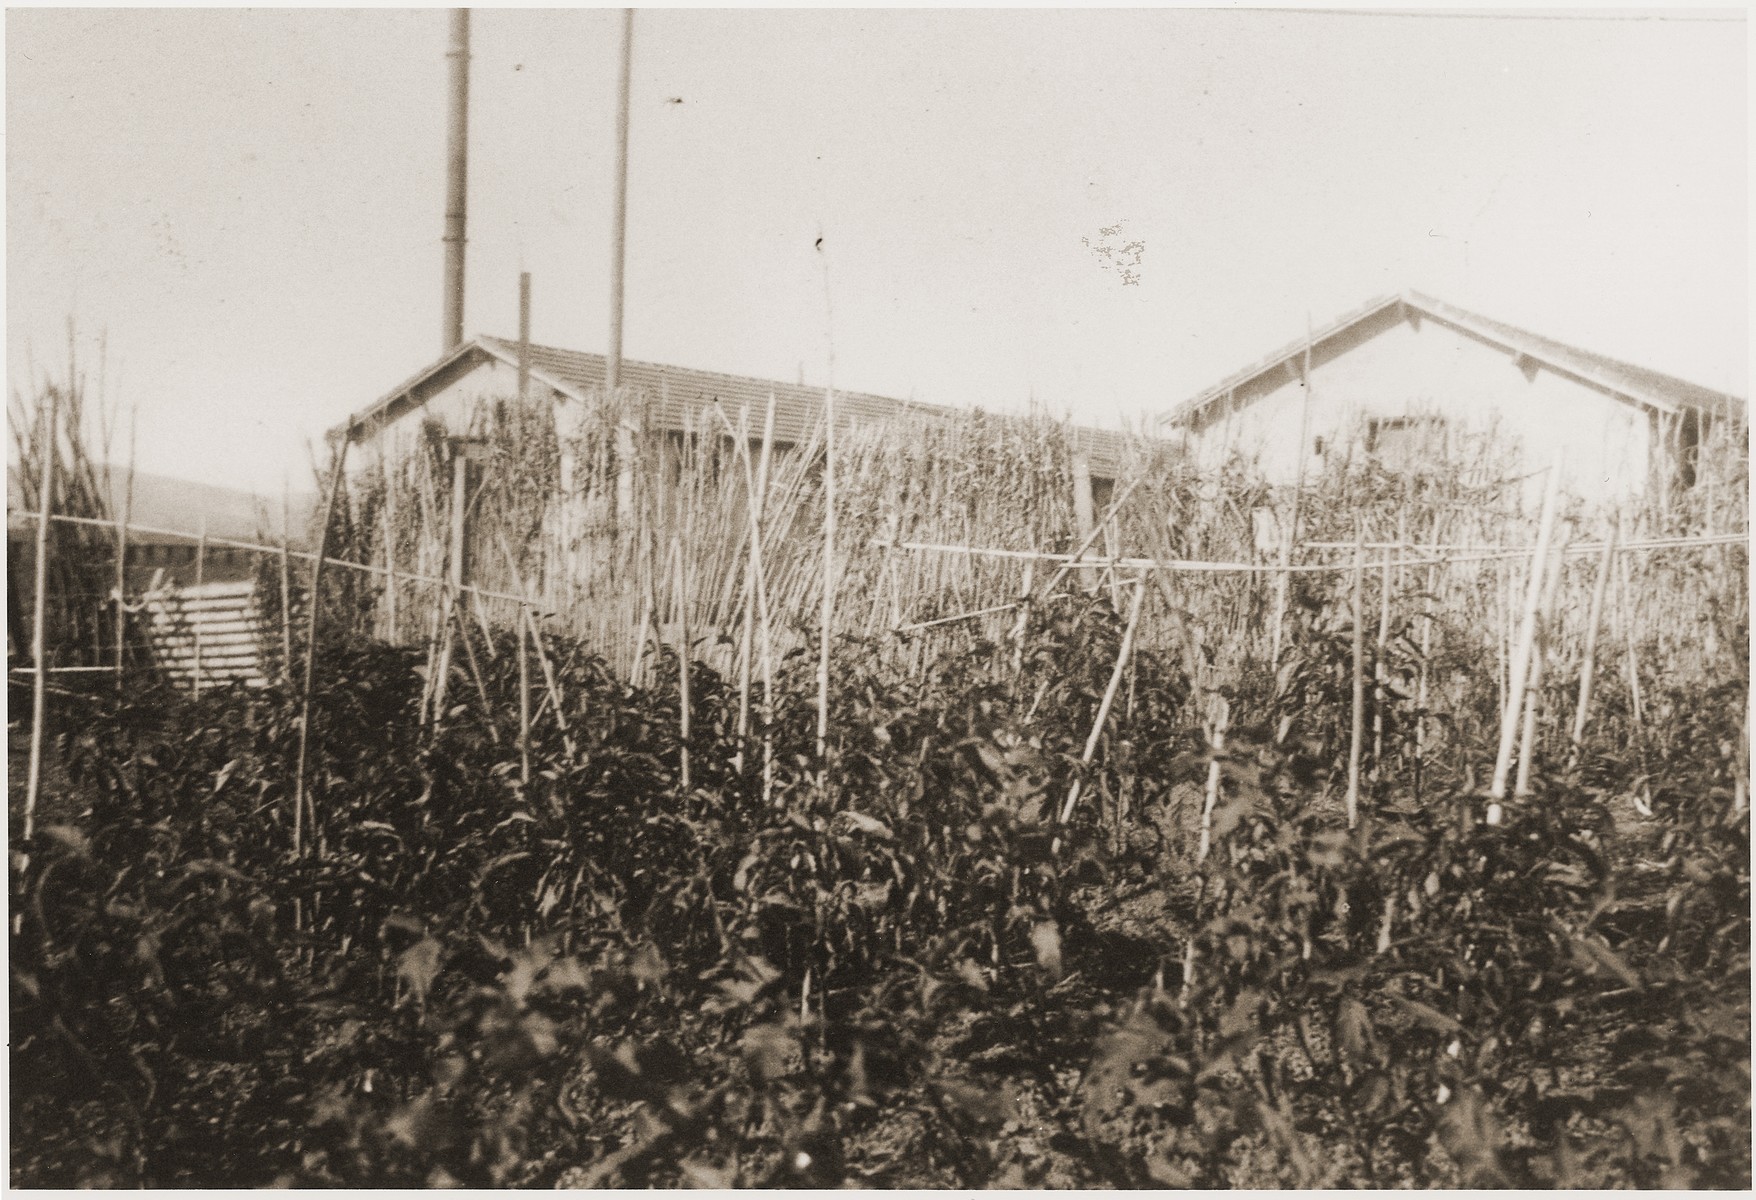 View of the Rivesaltes internment camp.